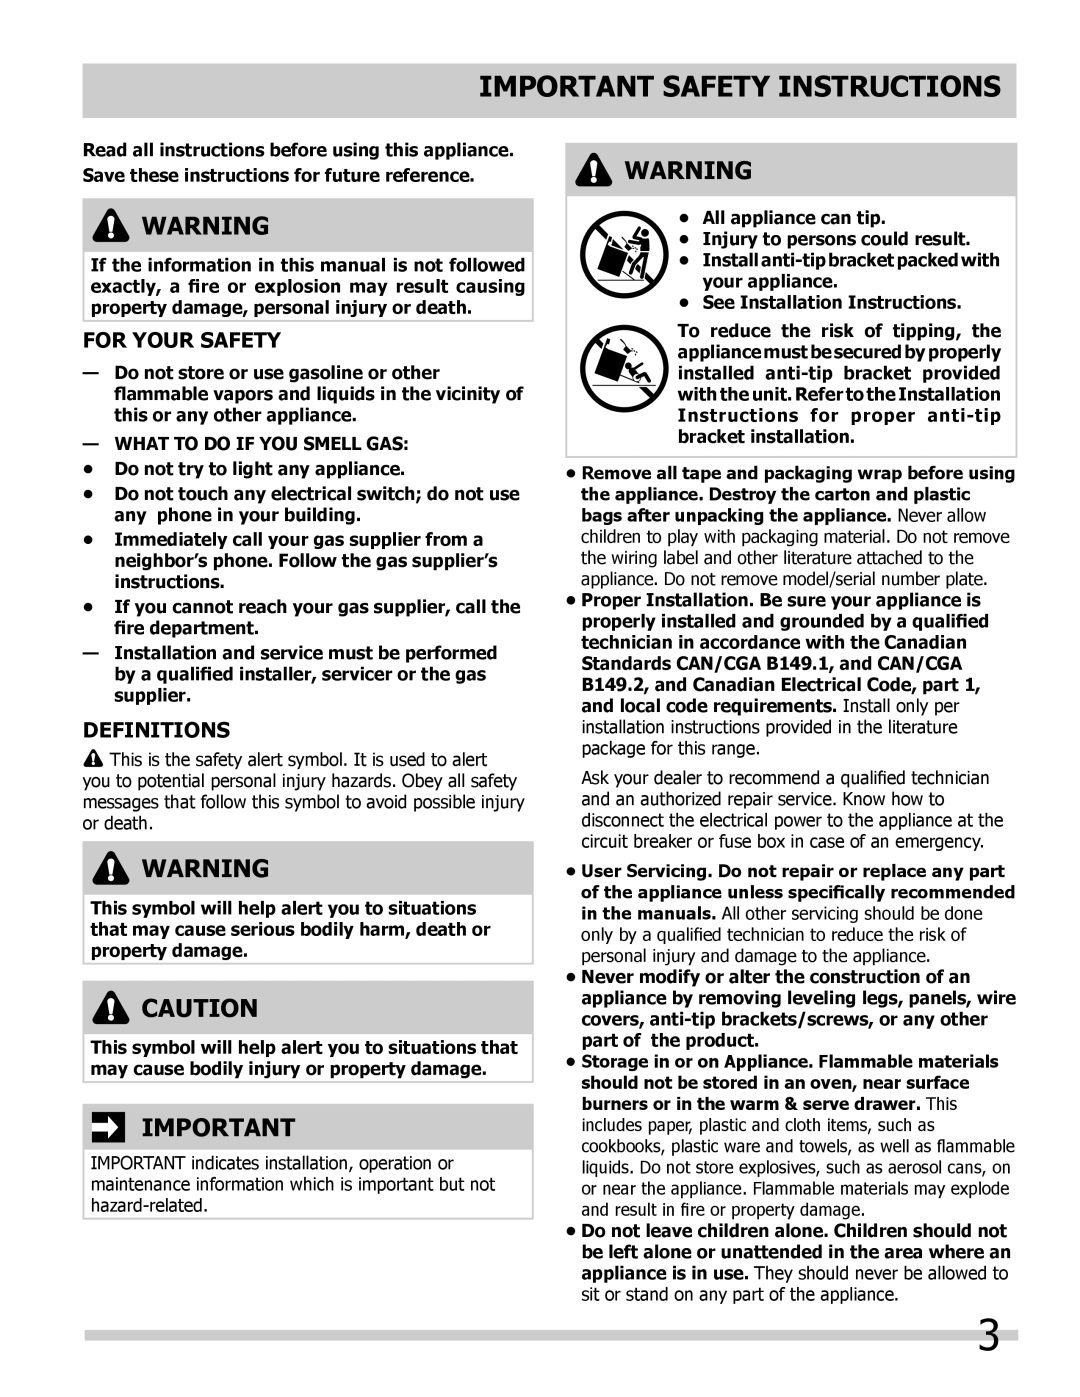 Frigidaire 318205852 manual Important Safety Instructions, For Your Safety, Definitions, See Installation Instructions 